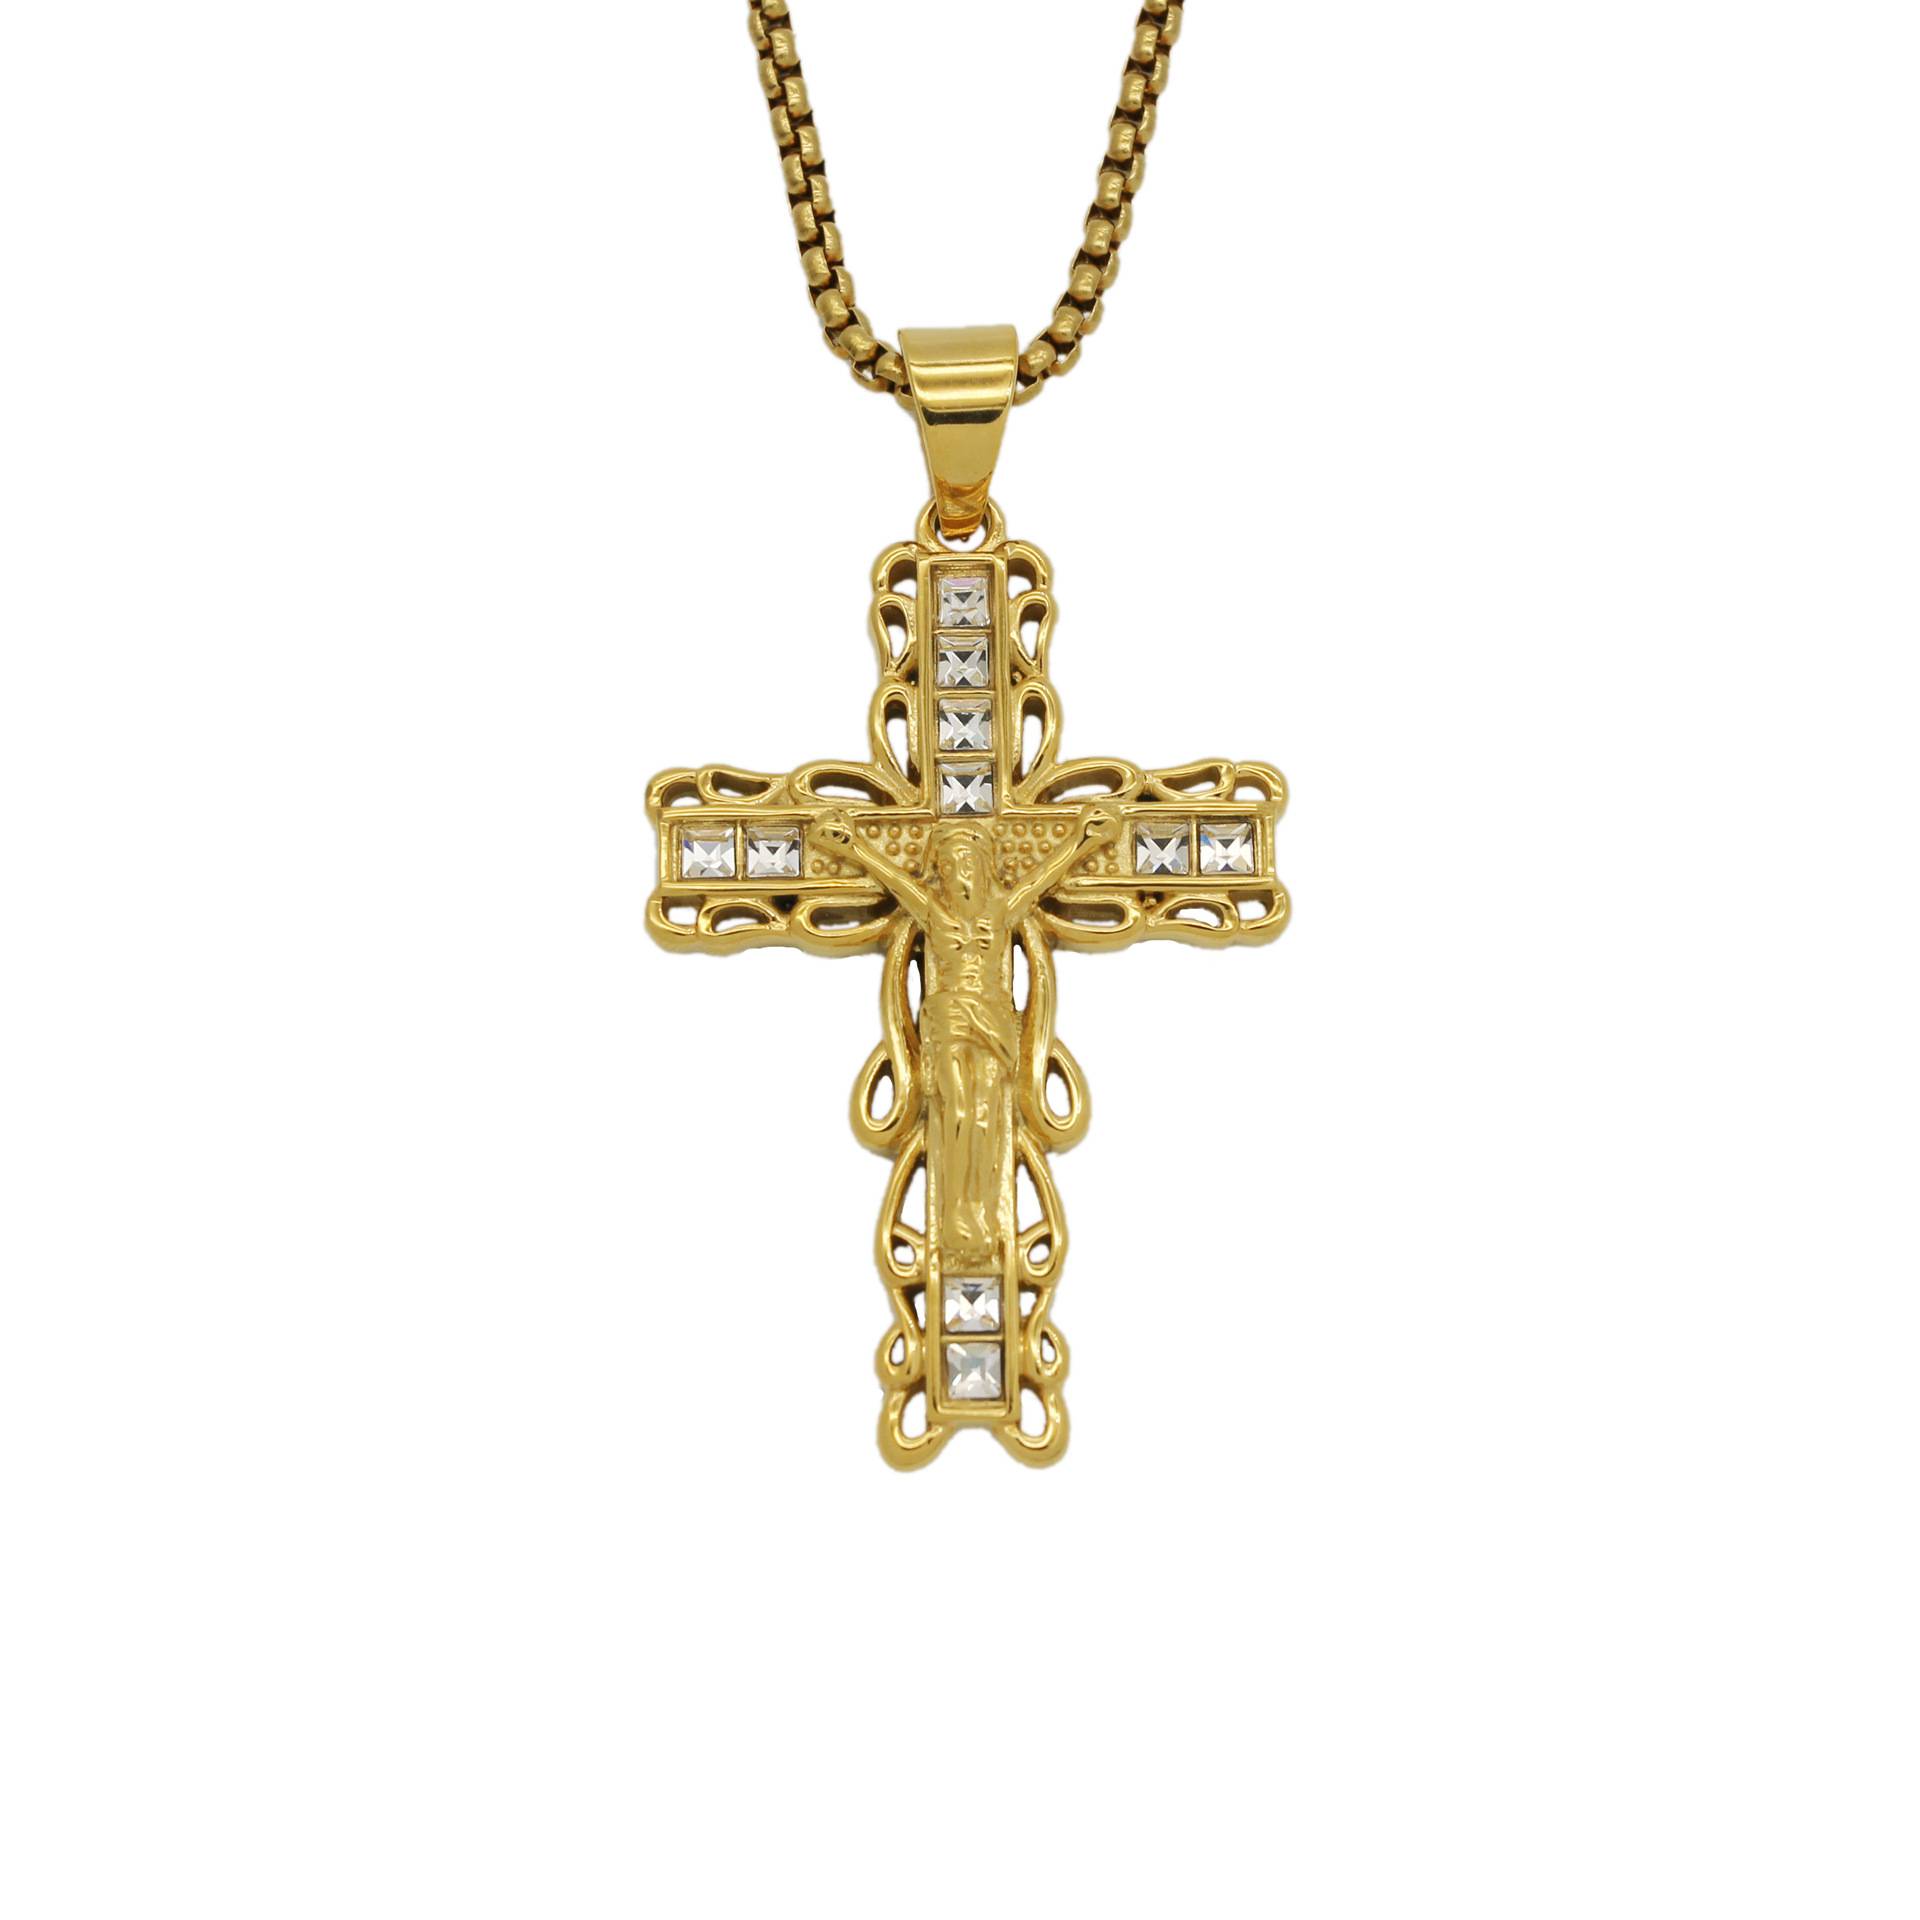 2023 Fashion Quality Stainless Steel Jesus Cross Pendant Necklaces Crystal Rhinestone Religion Jewelry Men Women Necklace Gifts